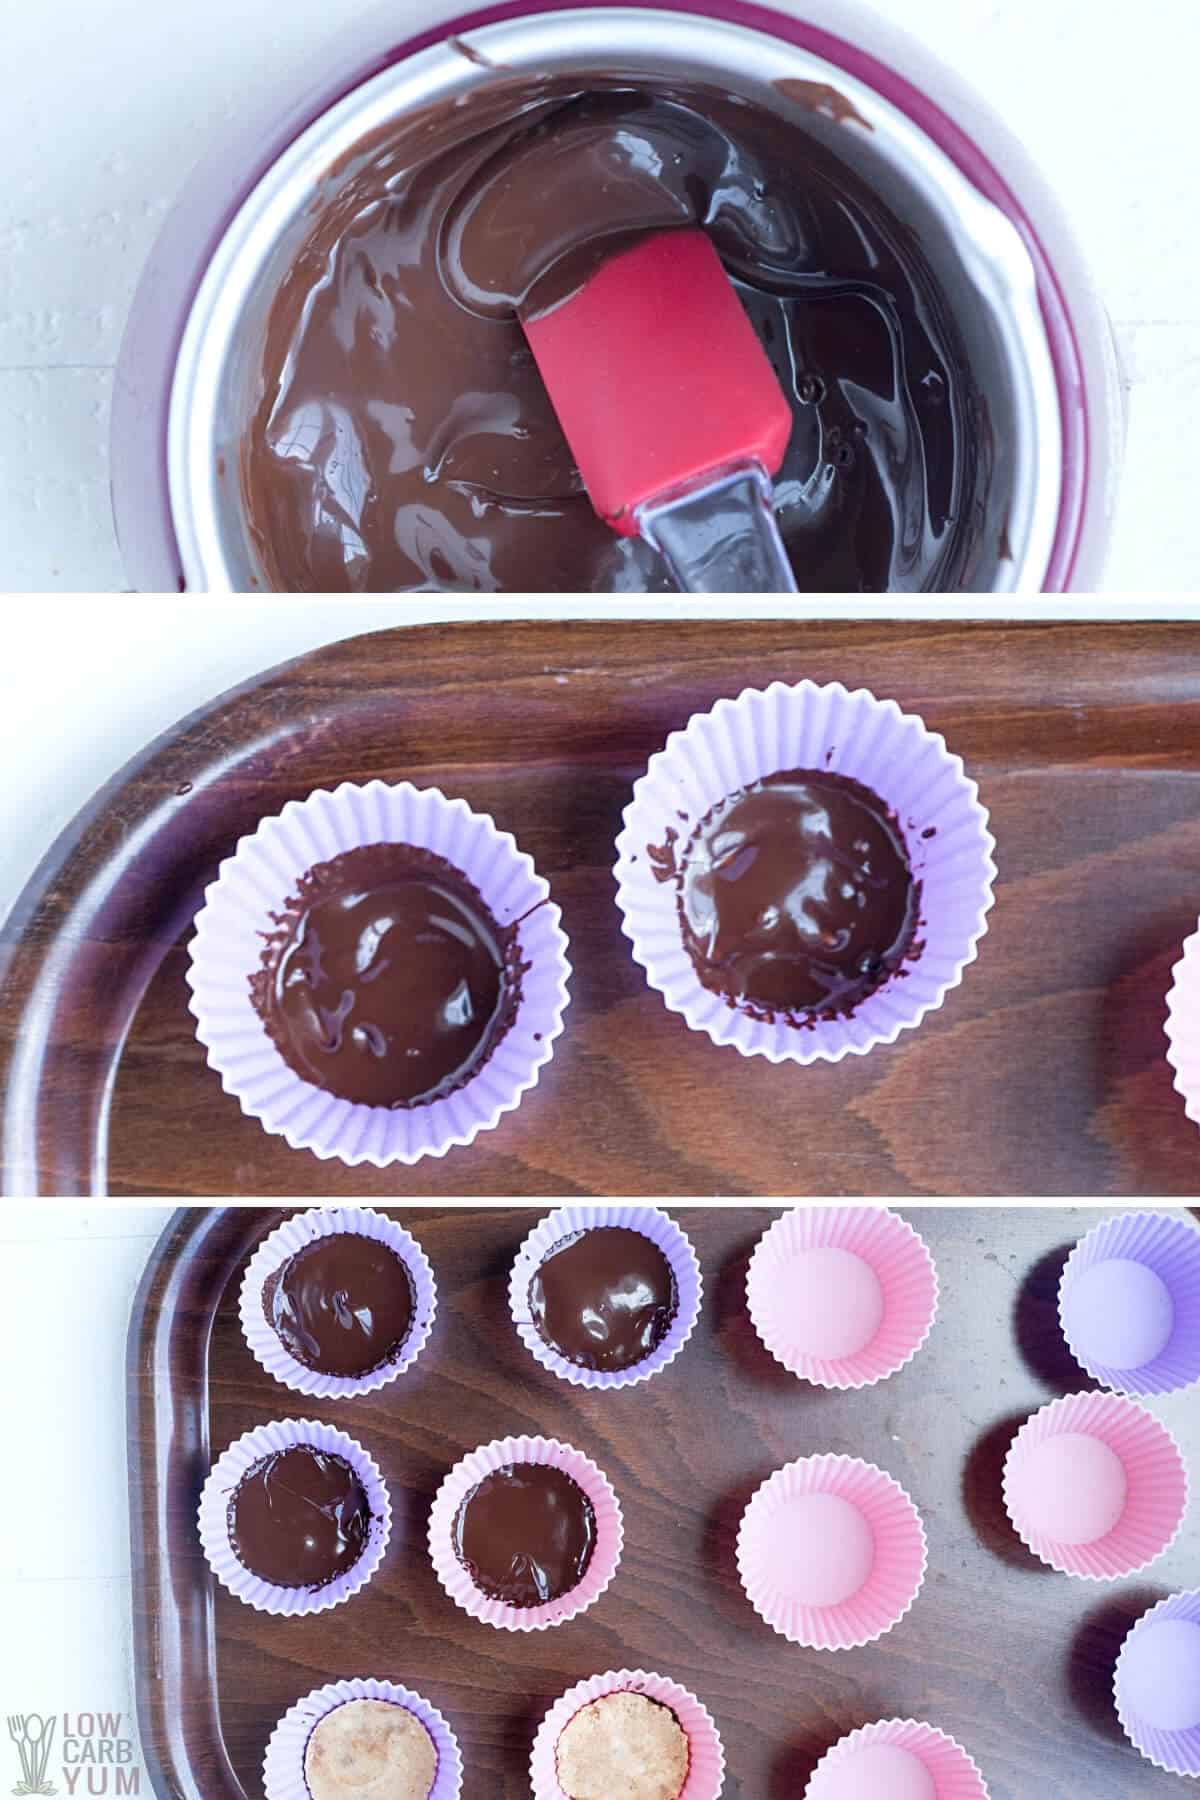 assembling the peanut butter cups in silicone cupcake molds